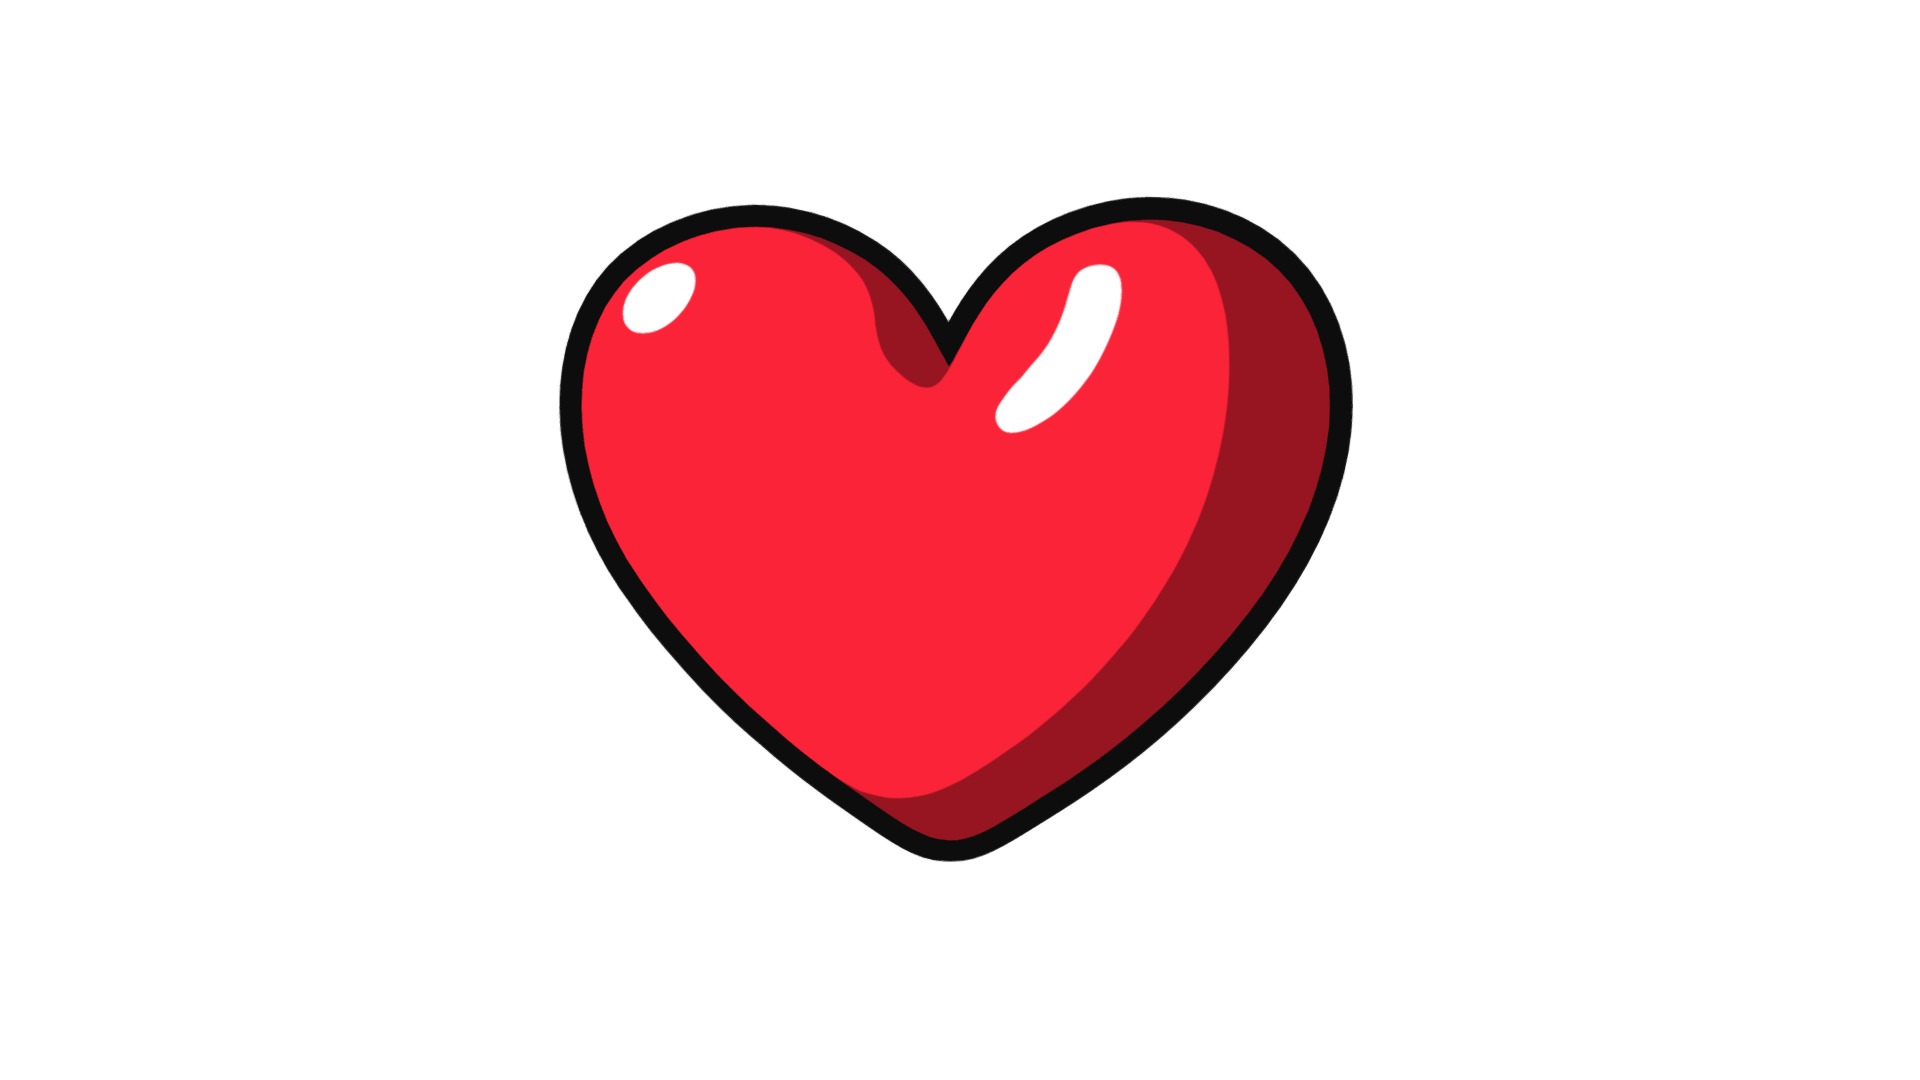 3D model Heart Hand-drawn Icon - This is a 3D model of the Heart Hand-drawn Icon. The 3D model is about a red heart with a white background.